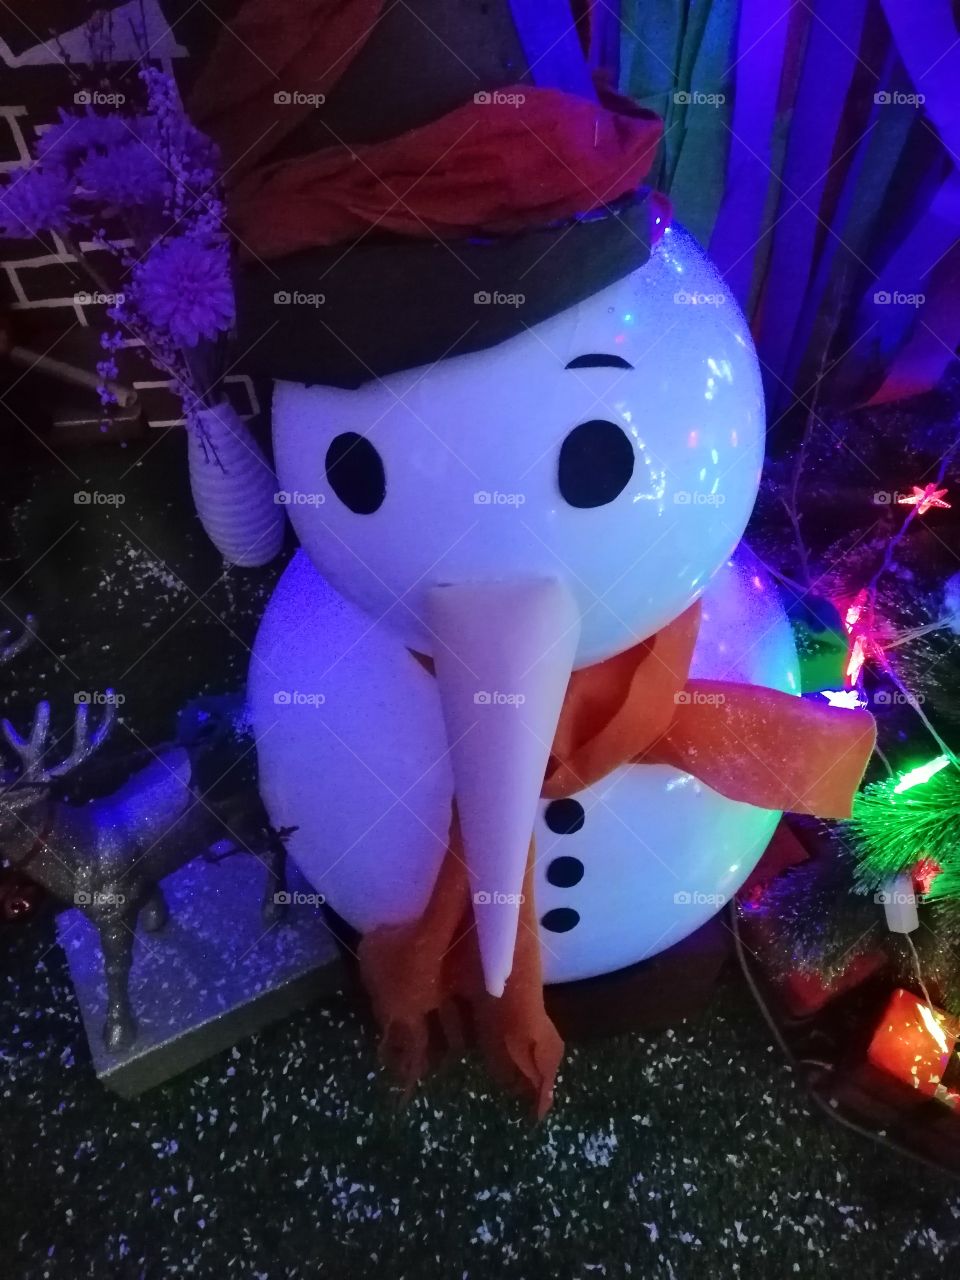 Our mr olaf made by our Dr.